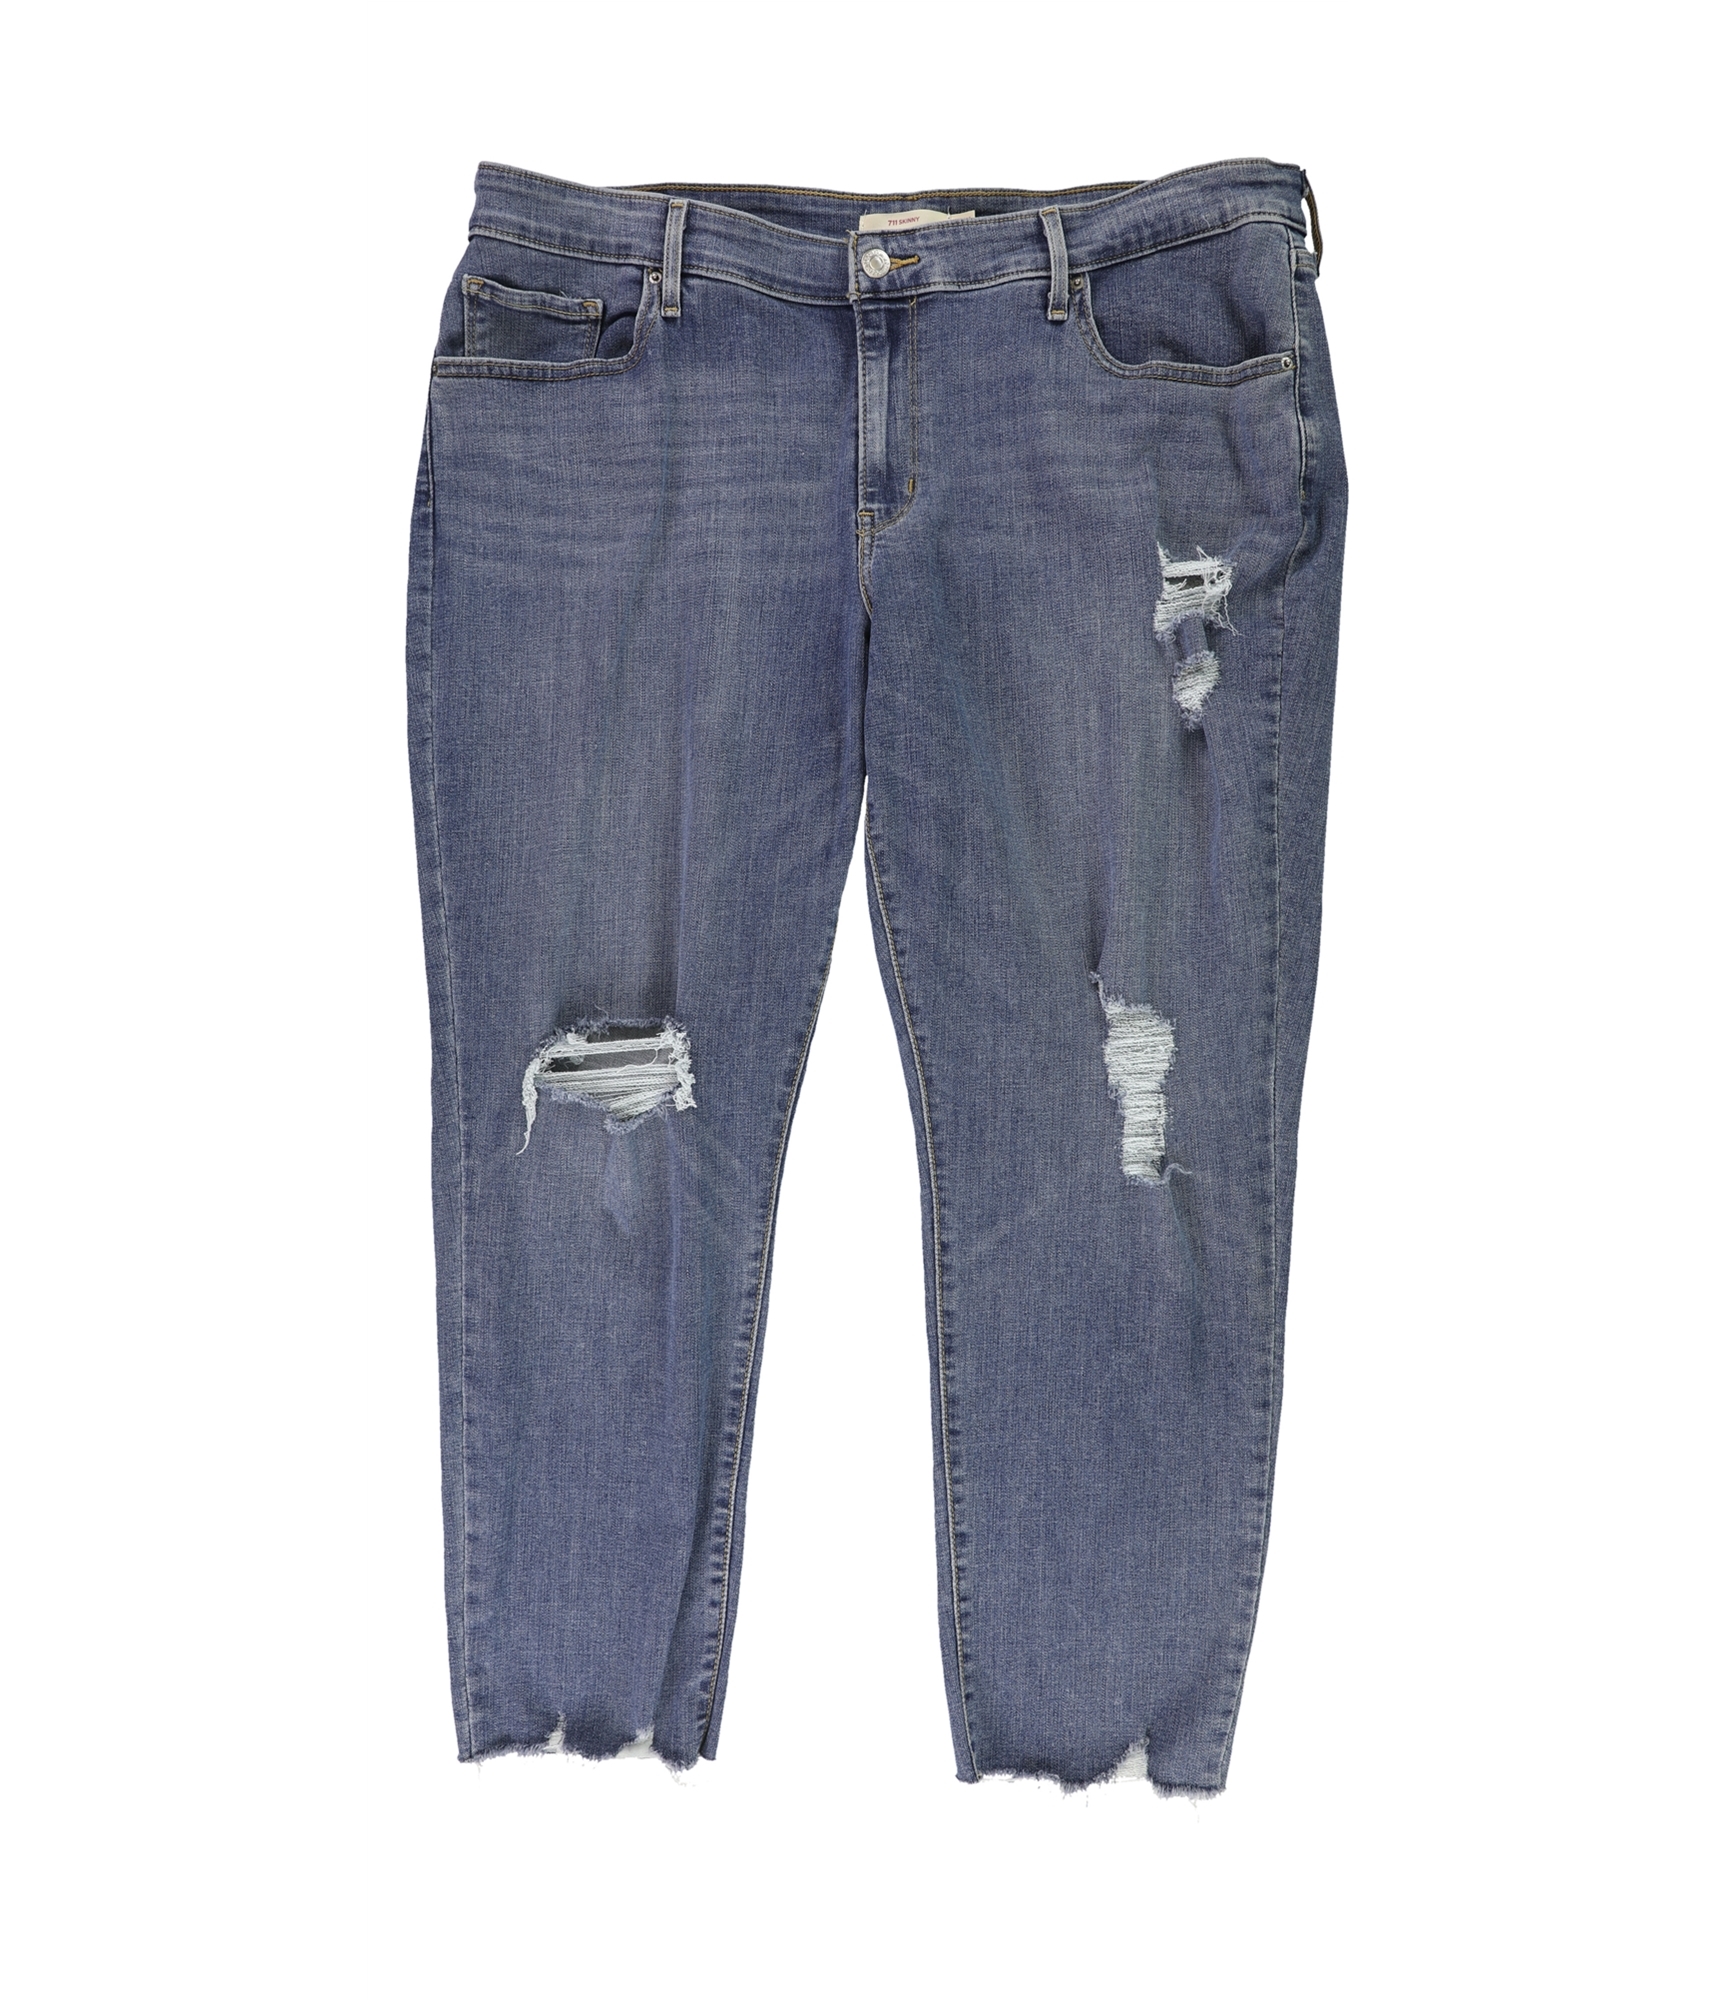 Buy a Womens Levi's Distressed Skinny Fit Jeans Online , TW1